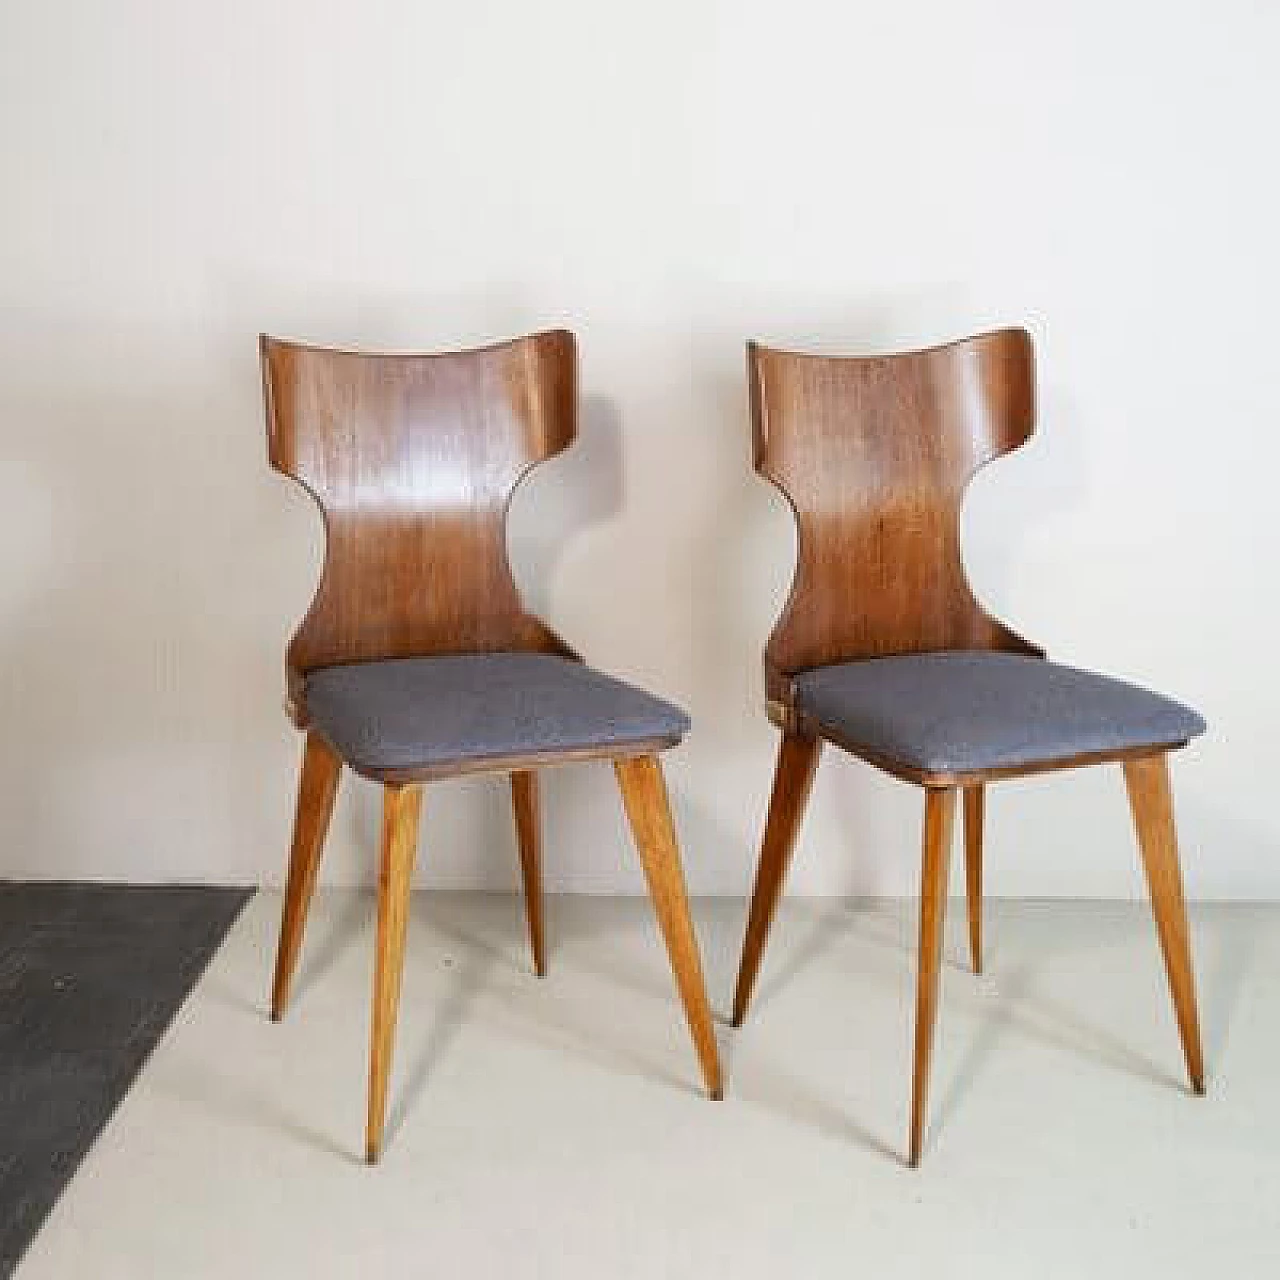 Pair of Curved Wooden Chairs by Carlo Ratti, 1950s 3